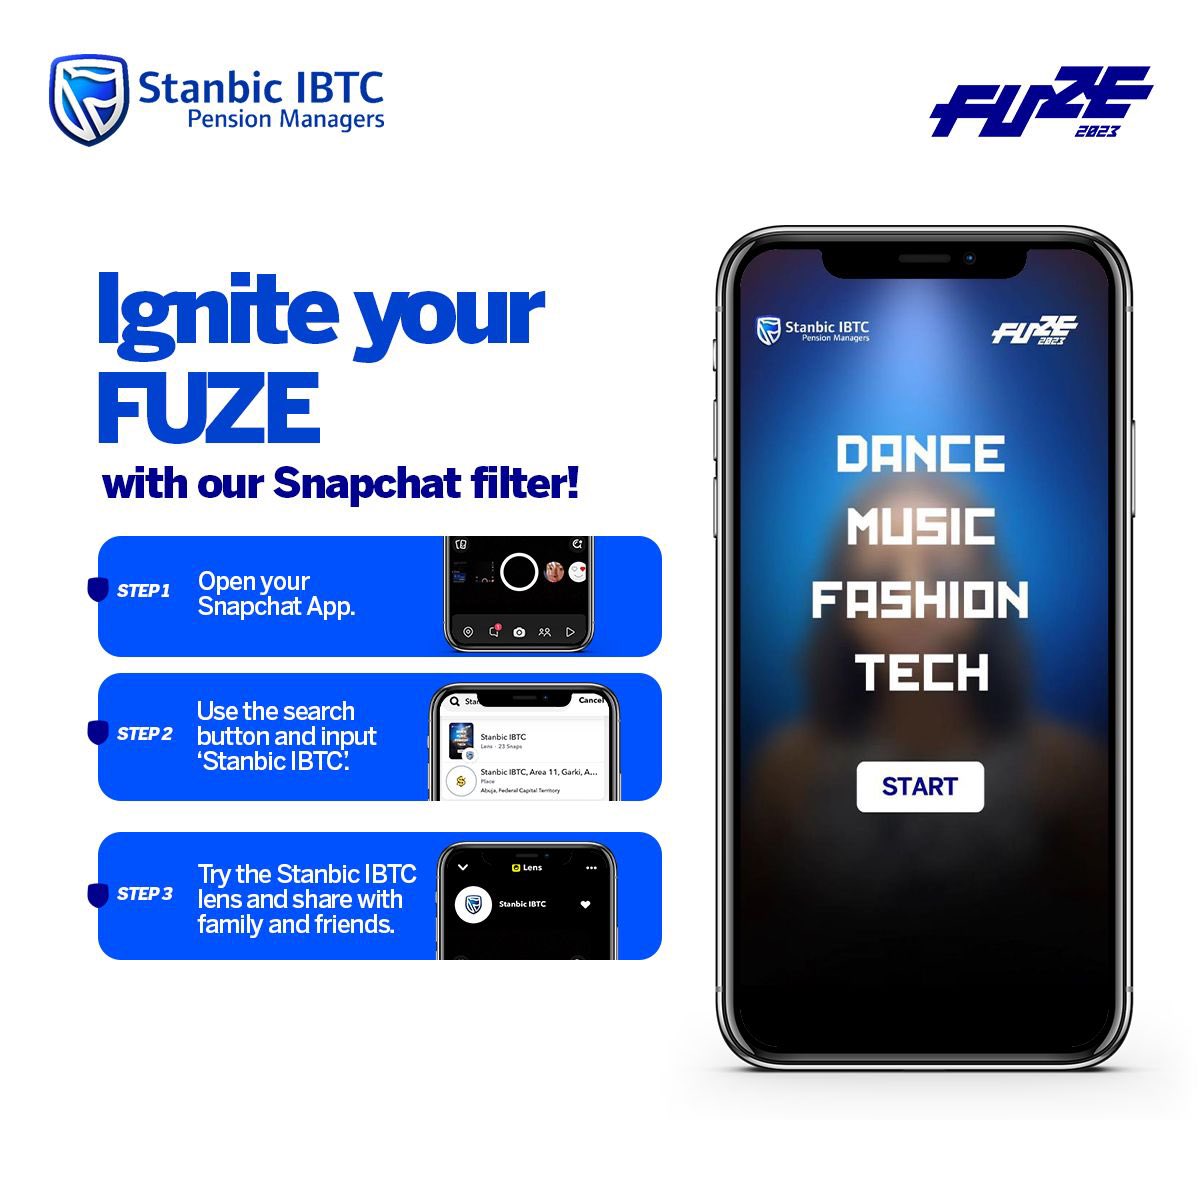 Get ready for the ultimate selfie experience at the FUZE Festival! Snap your pic and tag us to spread the fun. The FUZE is powered by @StanbicIBTC Pension Managers.​ #FUZE2023​ #IgniteYourFUZE